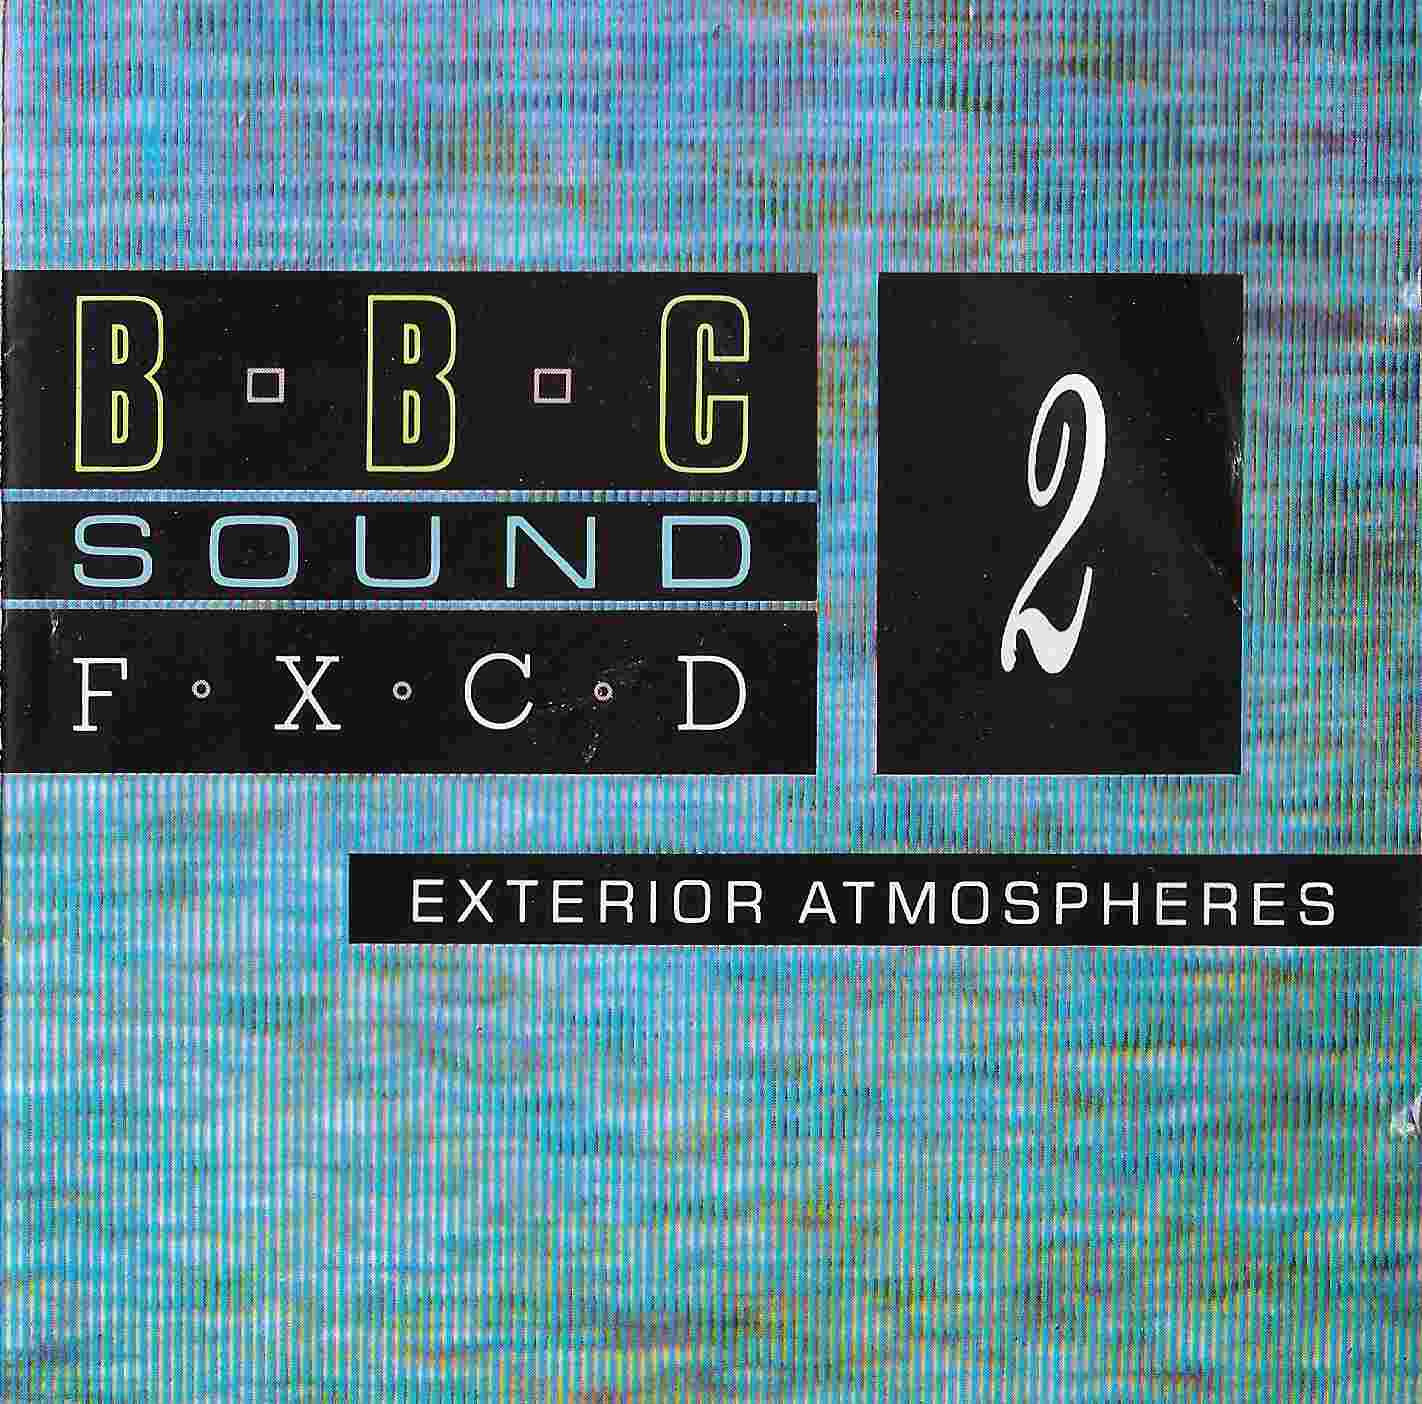 Picture of Exterior atmospheres by artist Various from the BBC cds - Records and Tapes library